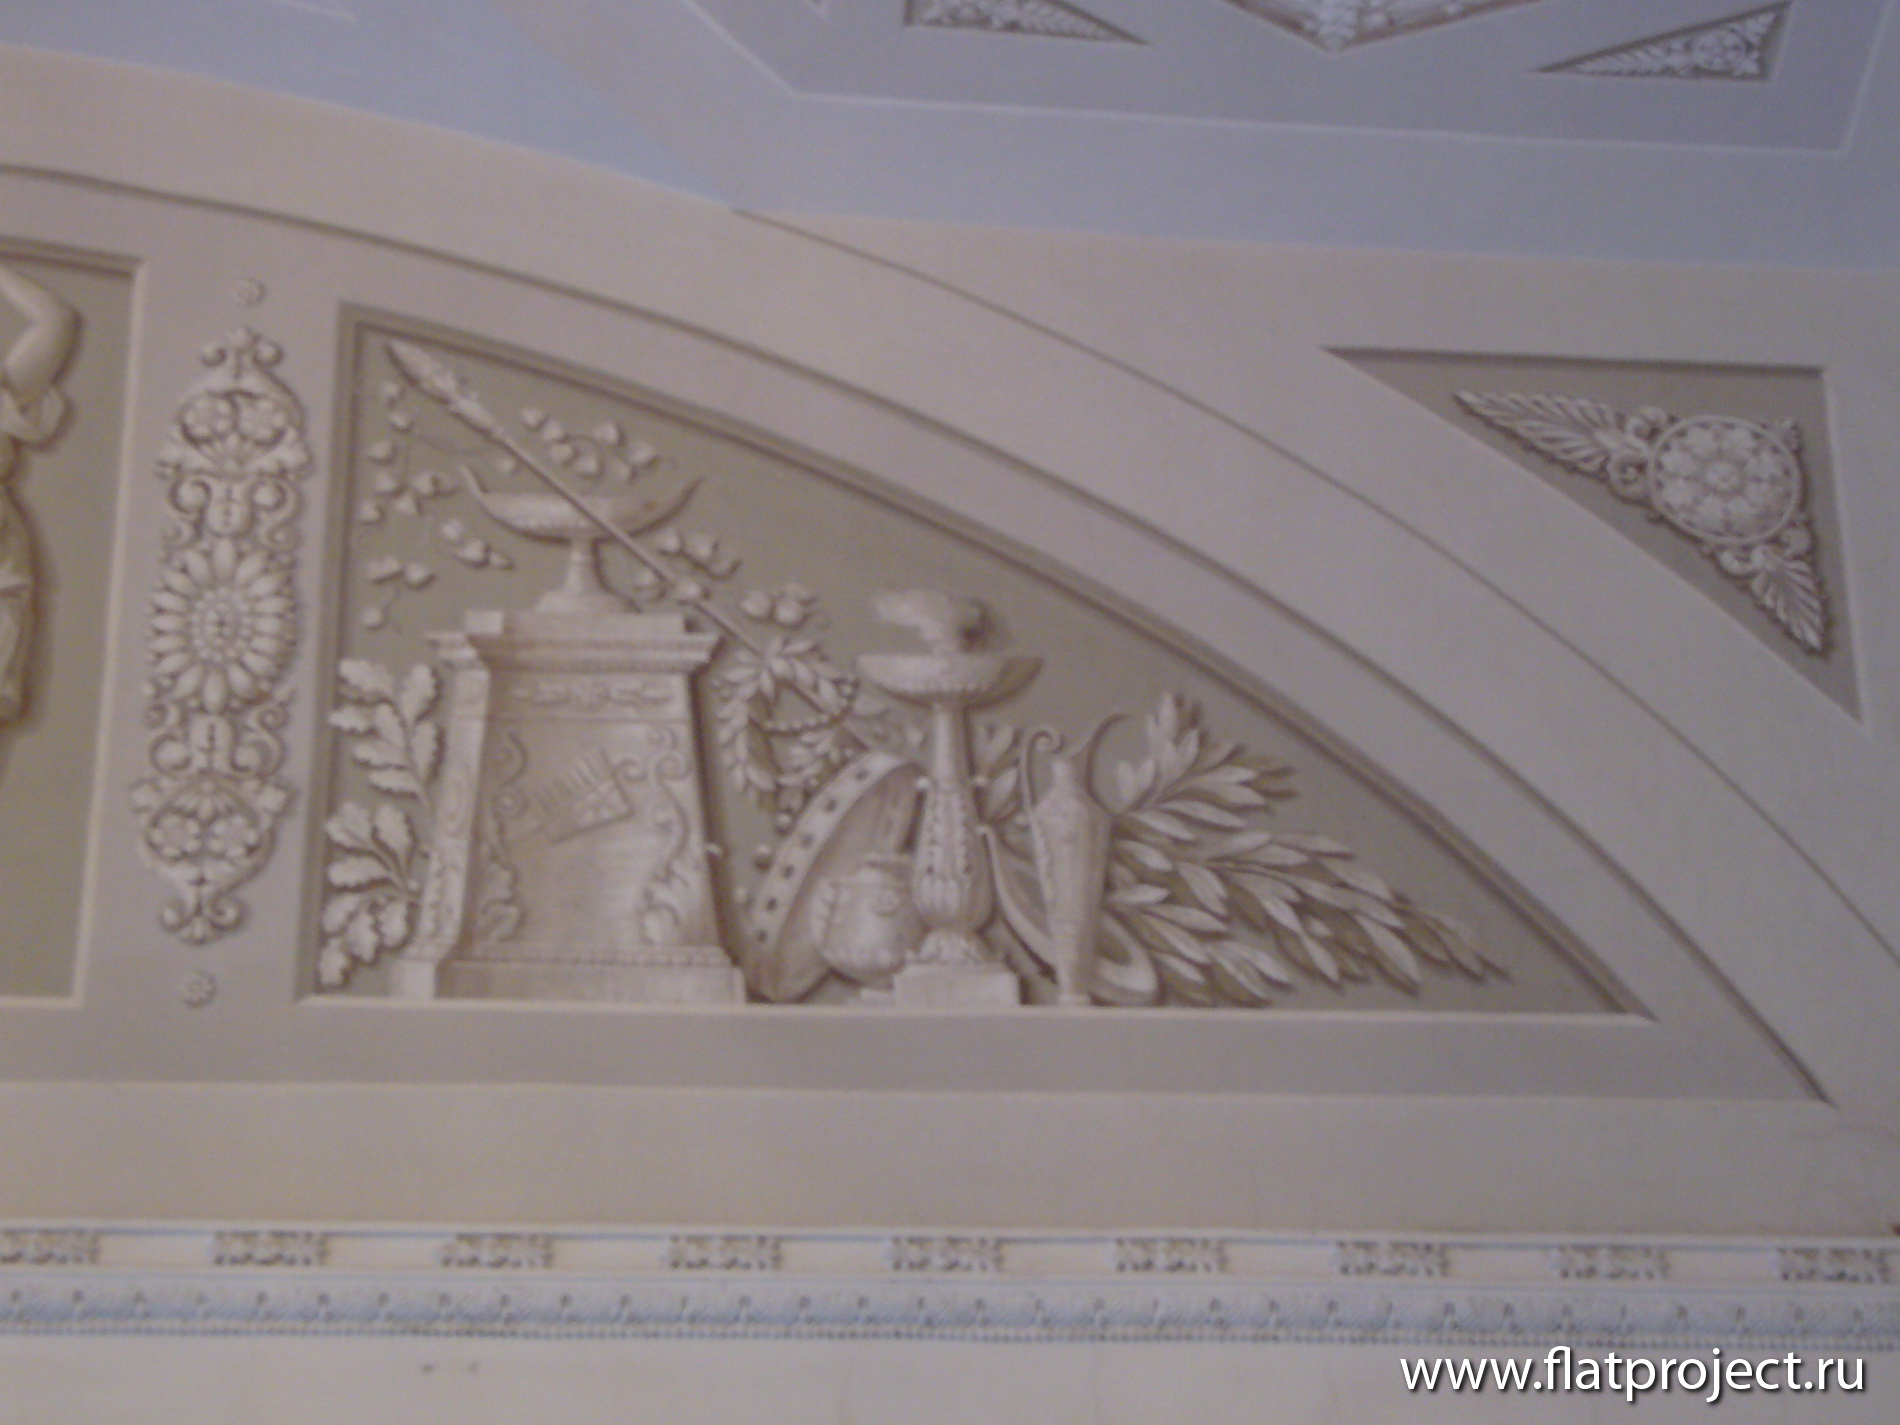 The State Russian museum interiors – photo 129